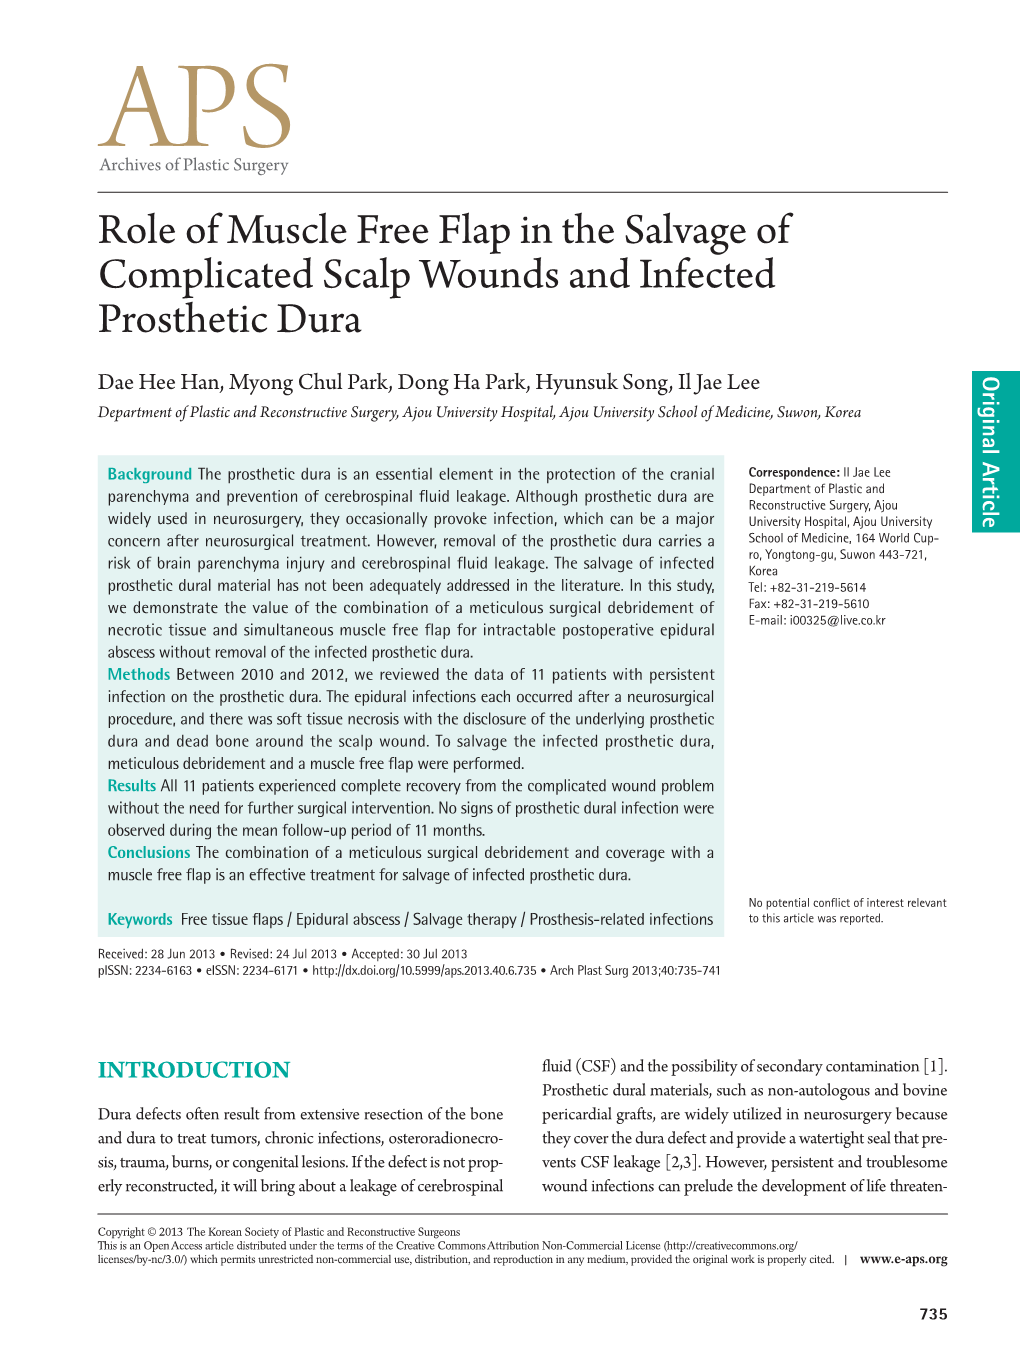 Role of Muscle Free Flap in the Salvage of Complicated Scalp Wounds and Infected Prosthetic Dura